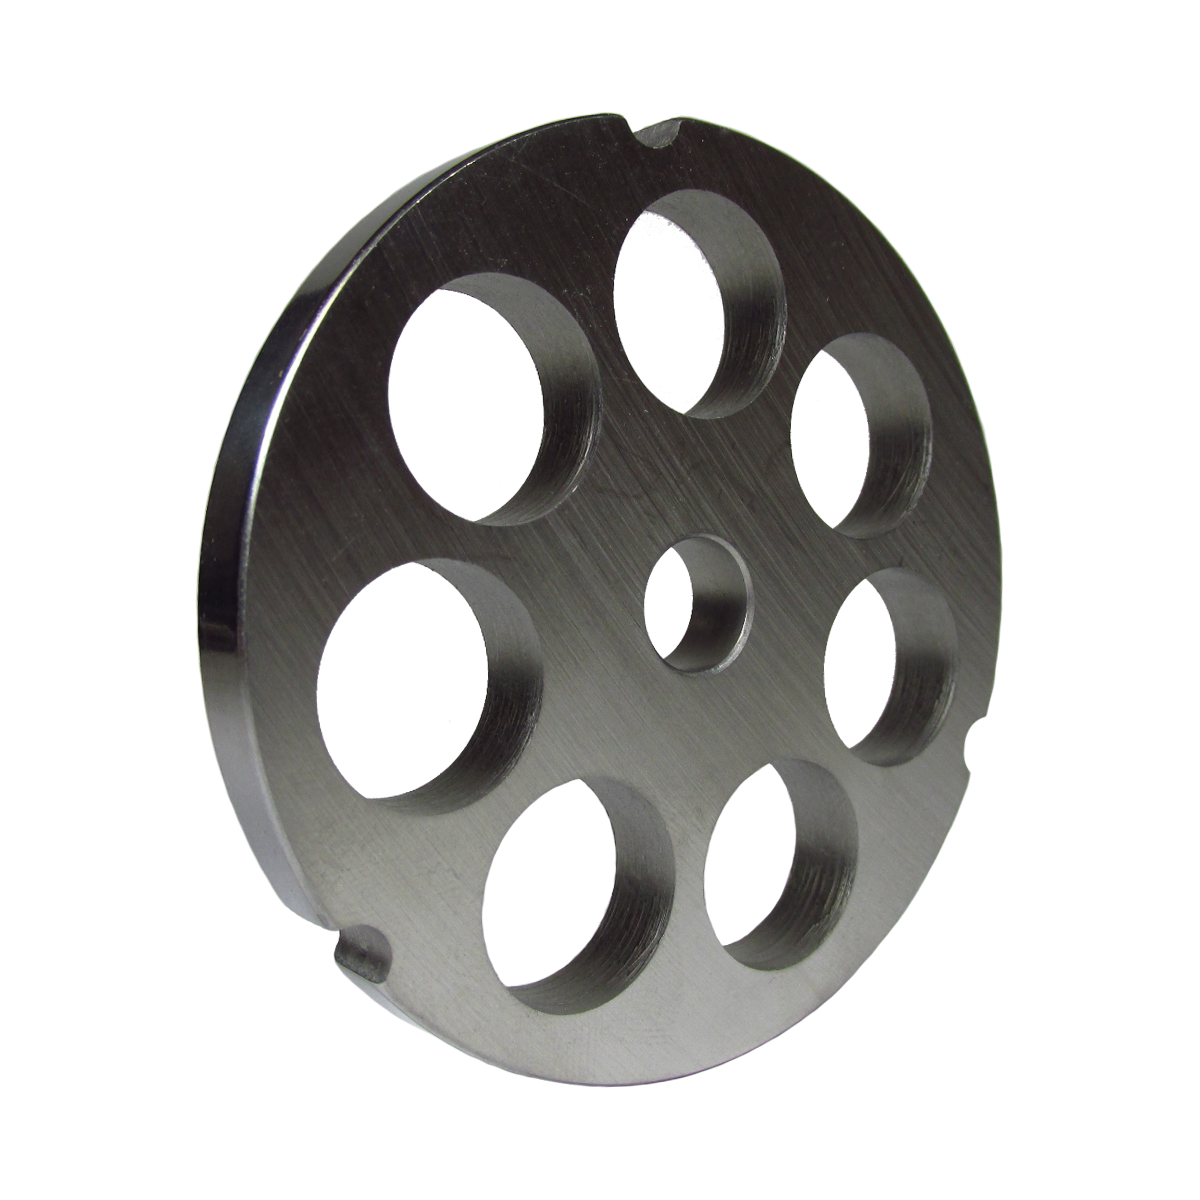 Grinder plate for #22 grinders with 1/2" hole, reversible